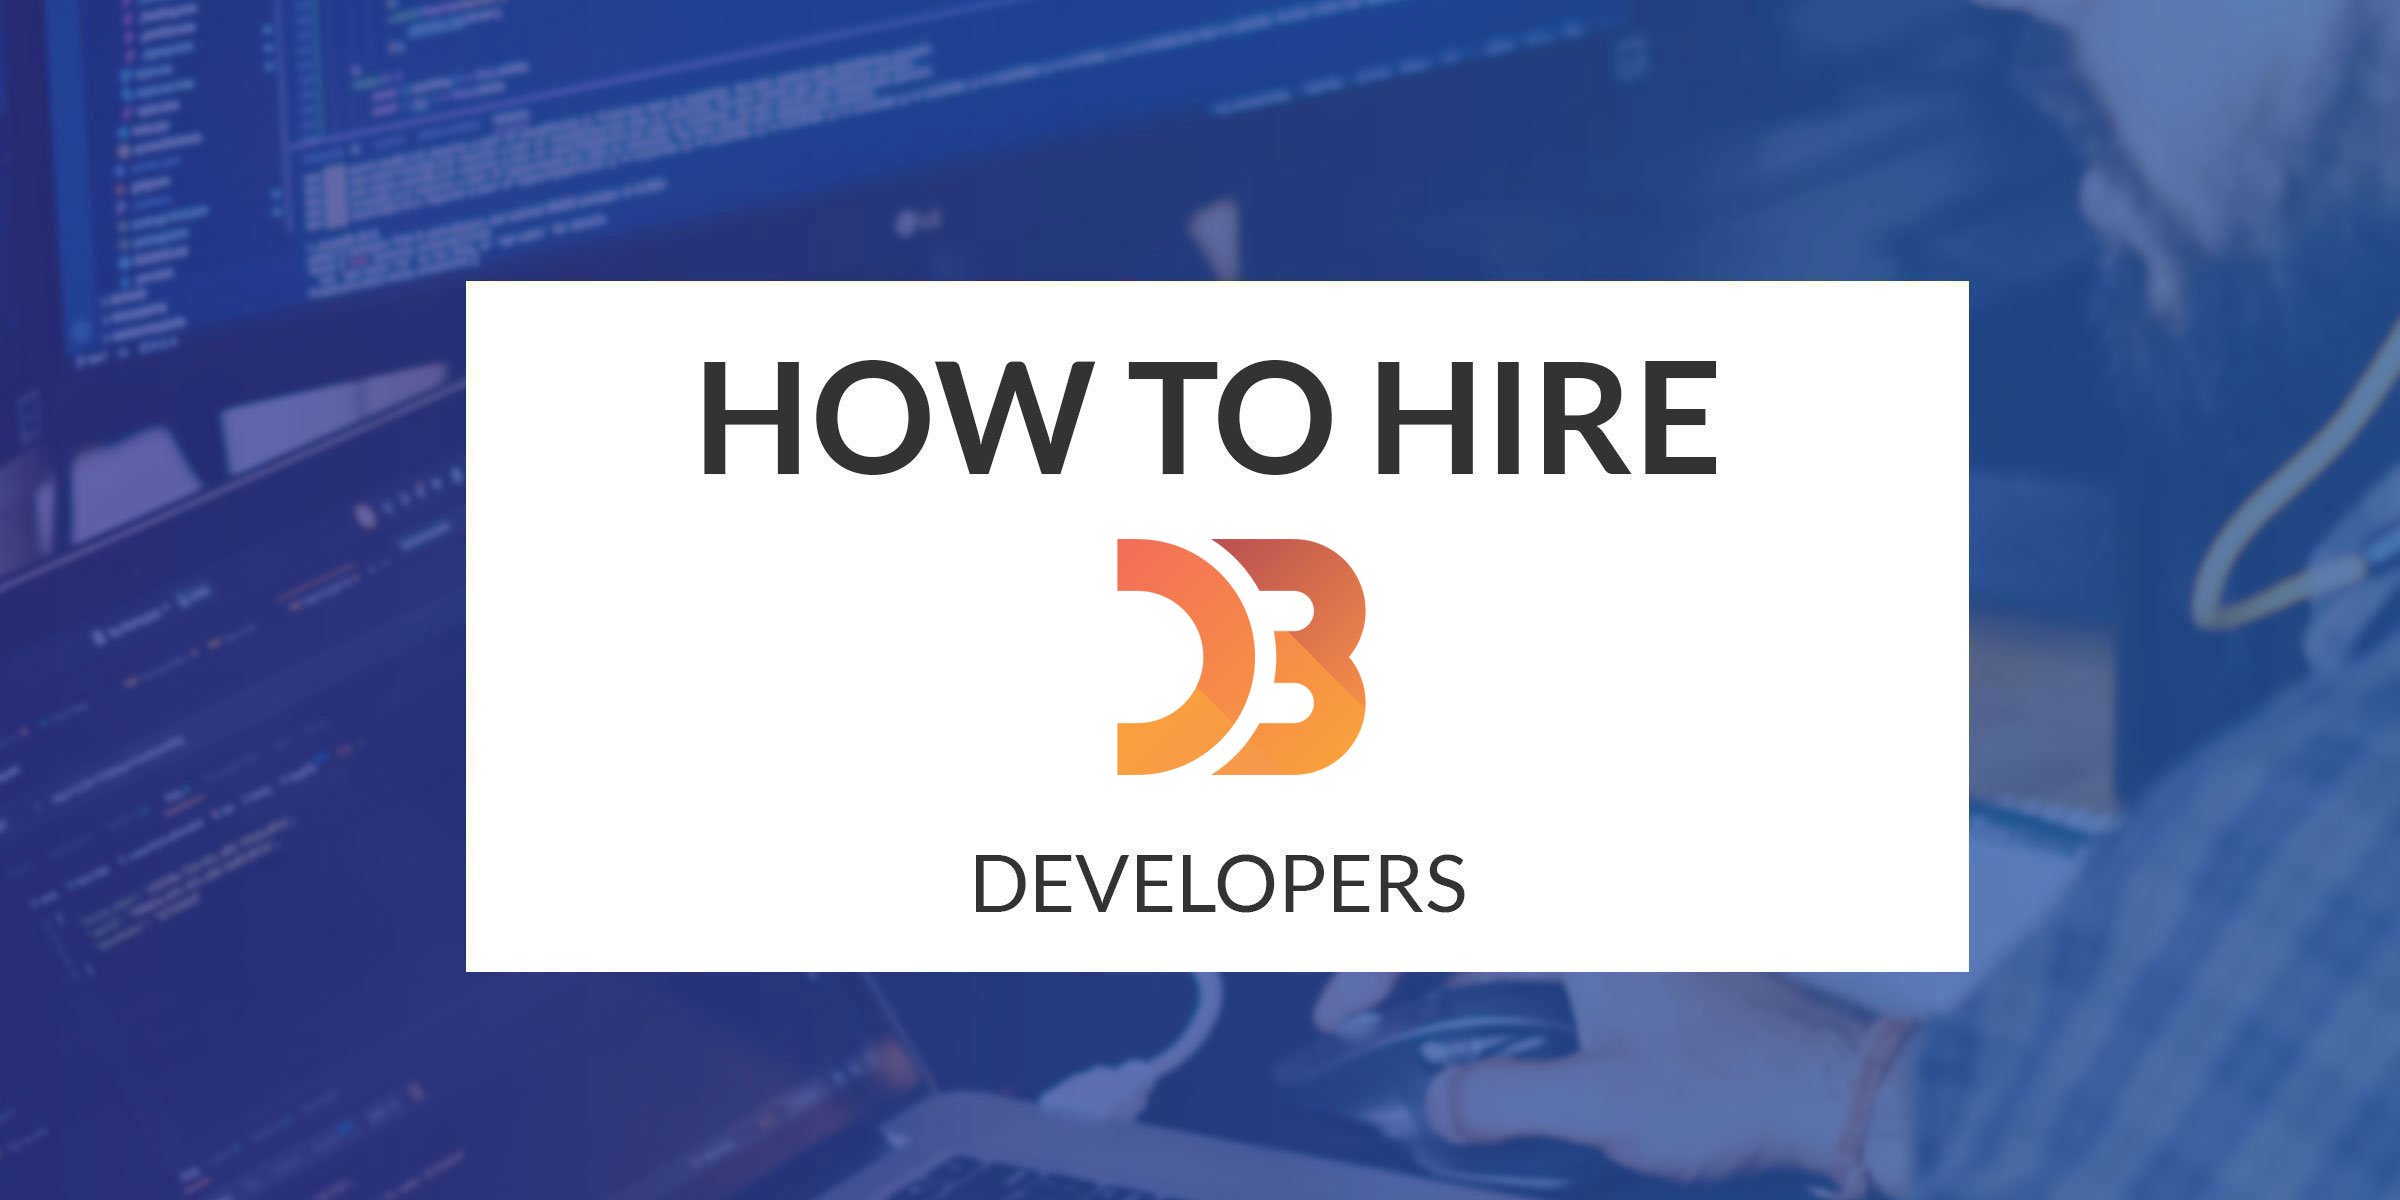 How to Hire D3.js Developers